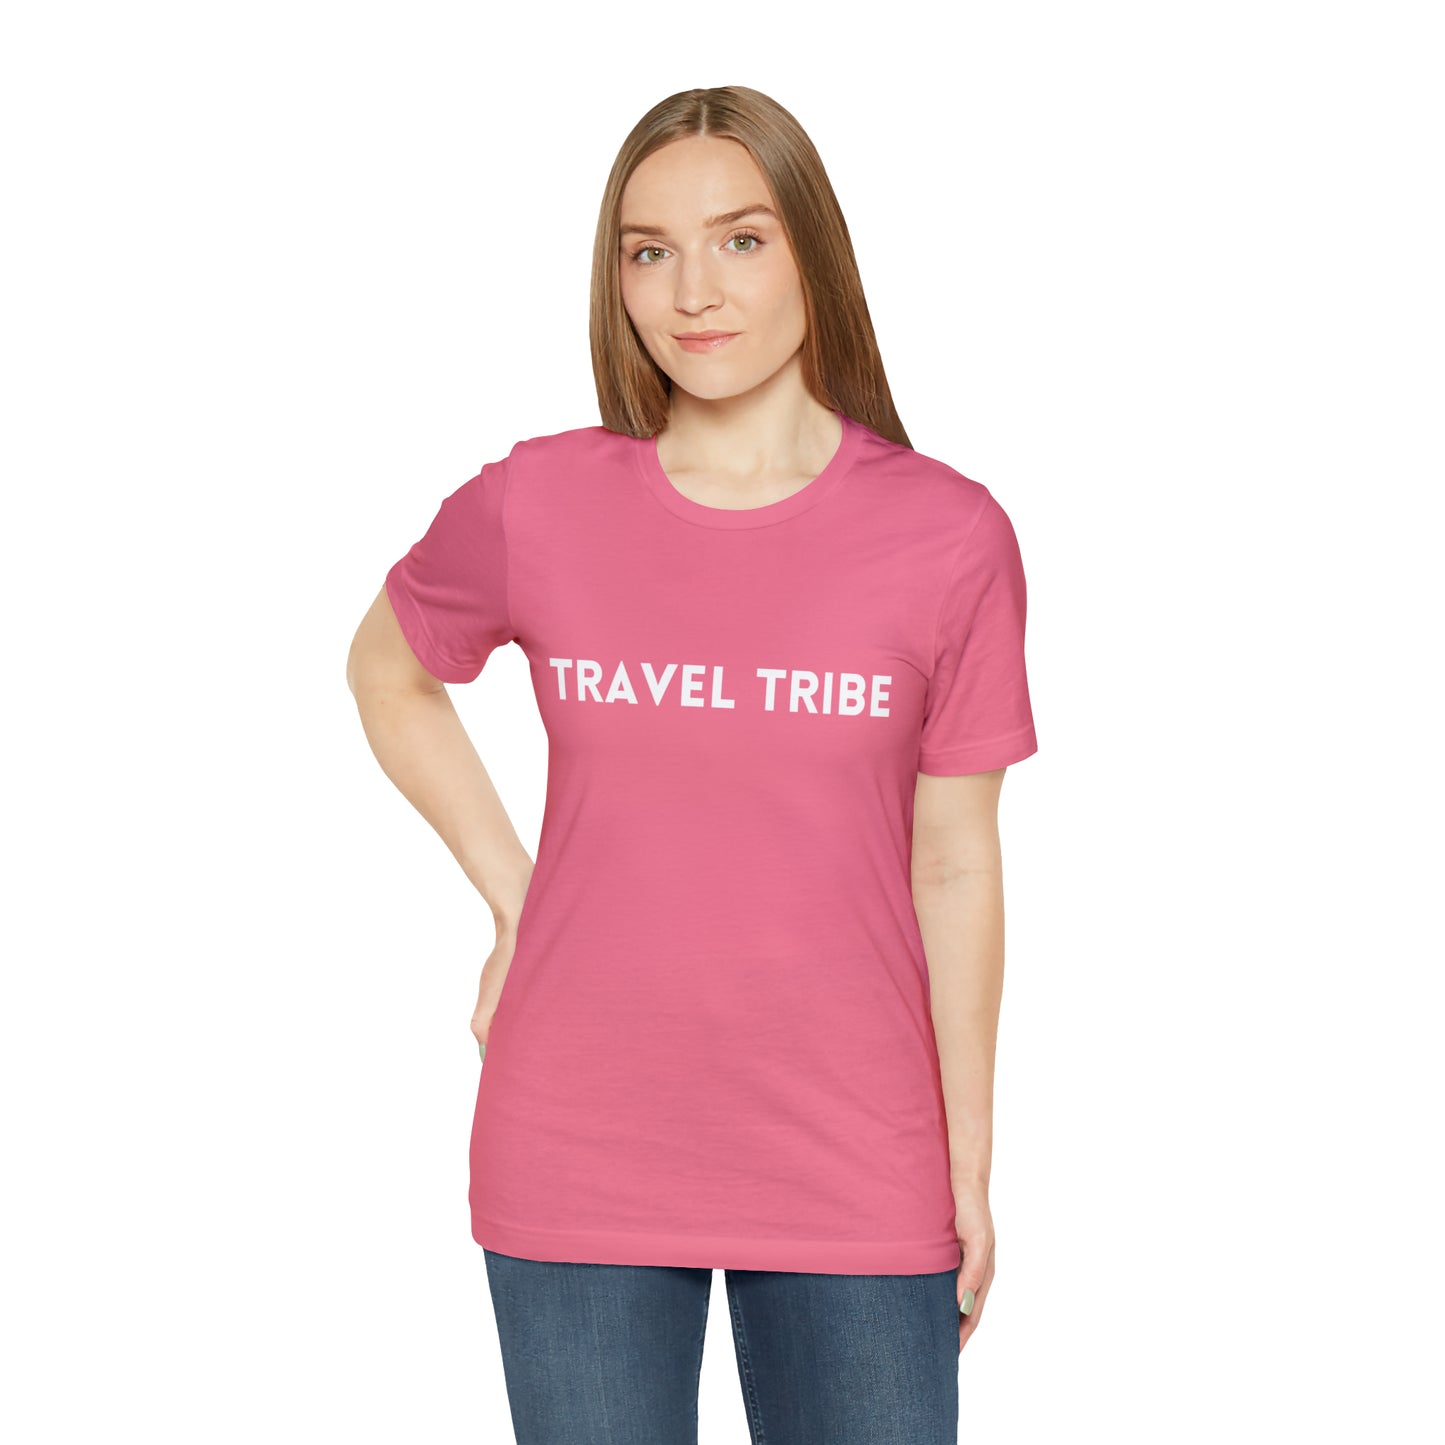 T-Shirt Tshirt Design Gift for Friend and Family Short Sleeved Shirt Travel Aesthetic T shirt for Vacation Petrova Designs